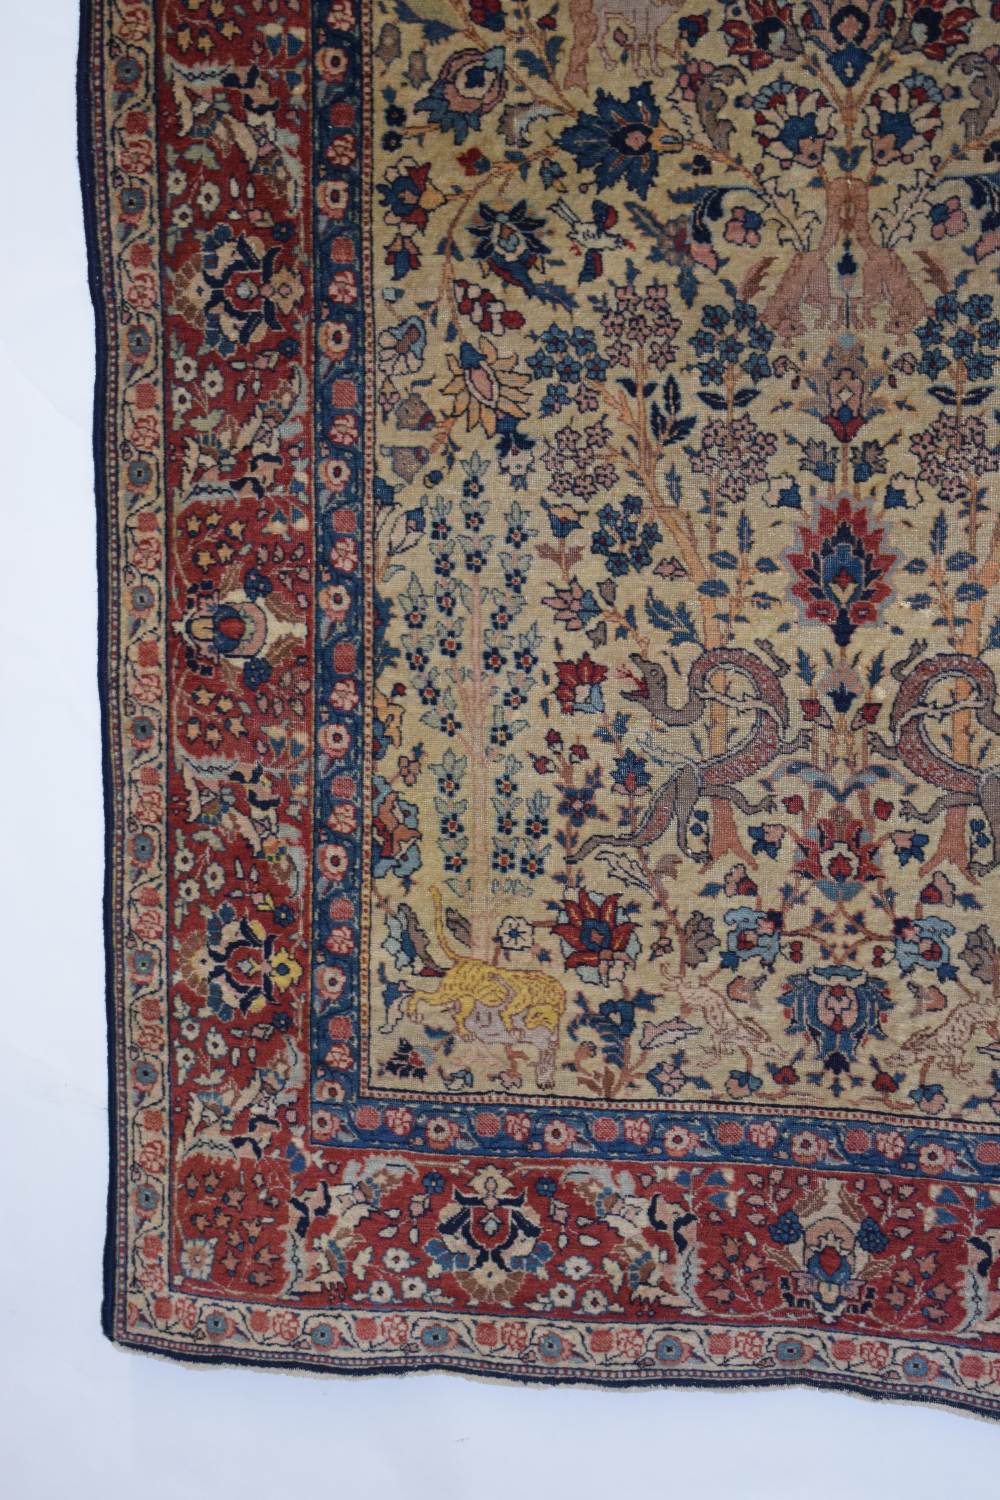 Tabriz pictorial rug, north west Persia, early 20th century, 6ft. 5in. X 4ft. 7in. 1.96m. X 1.40m. - Image 5 of 9